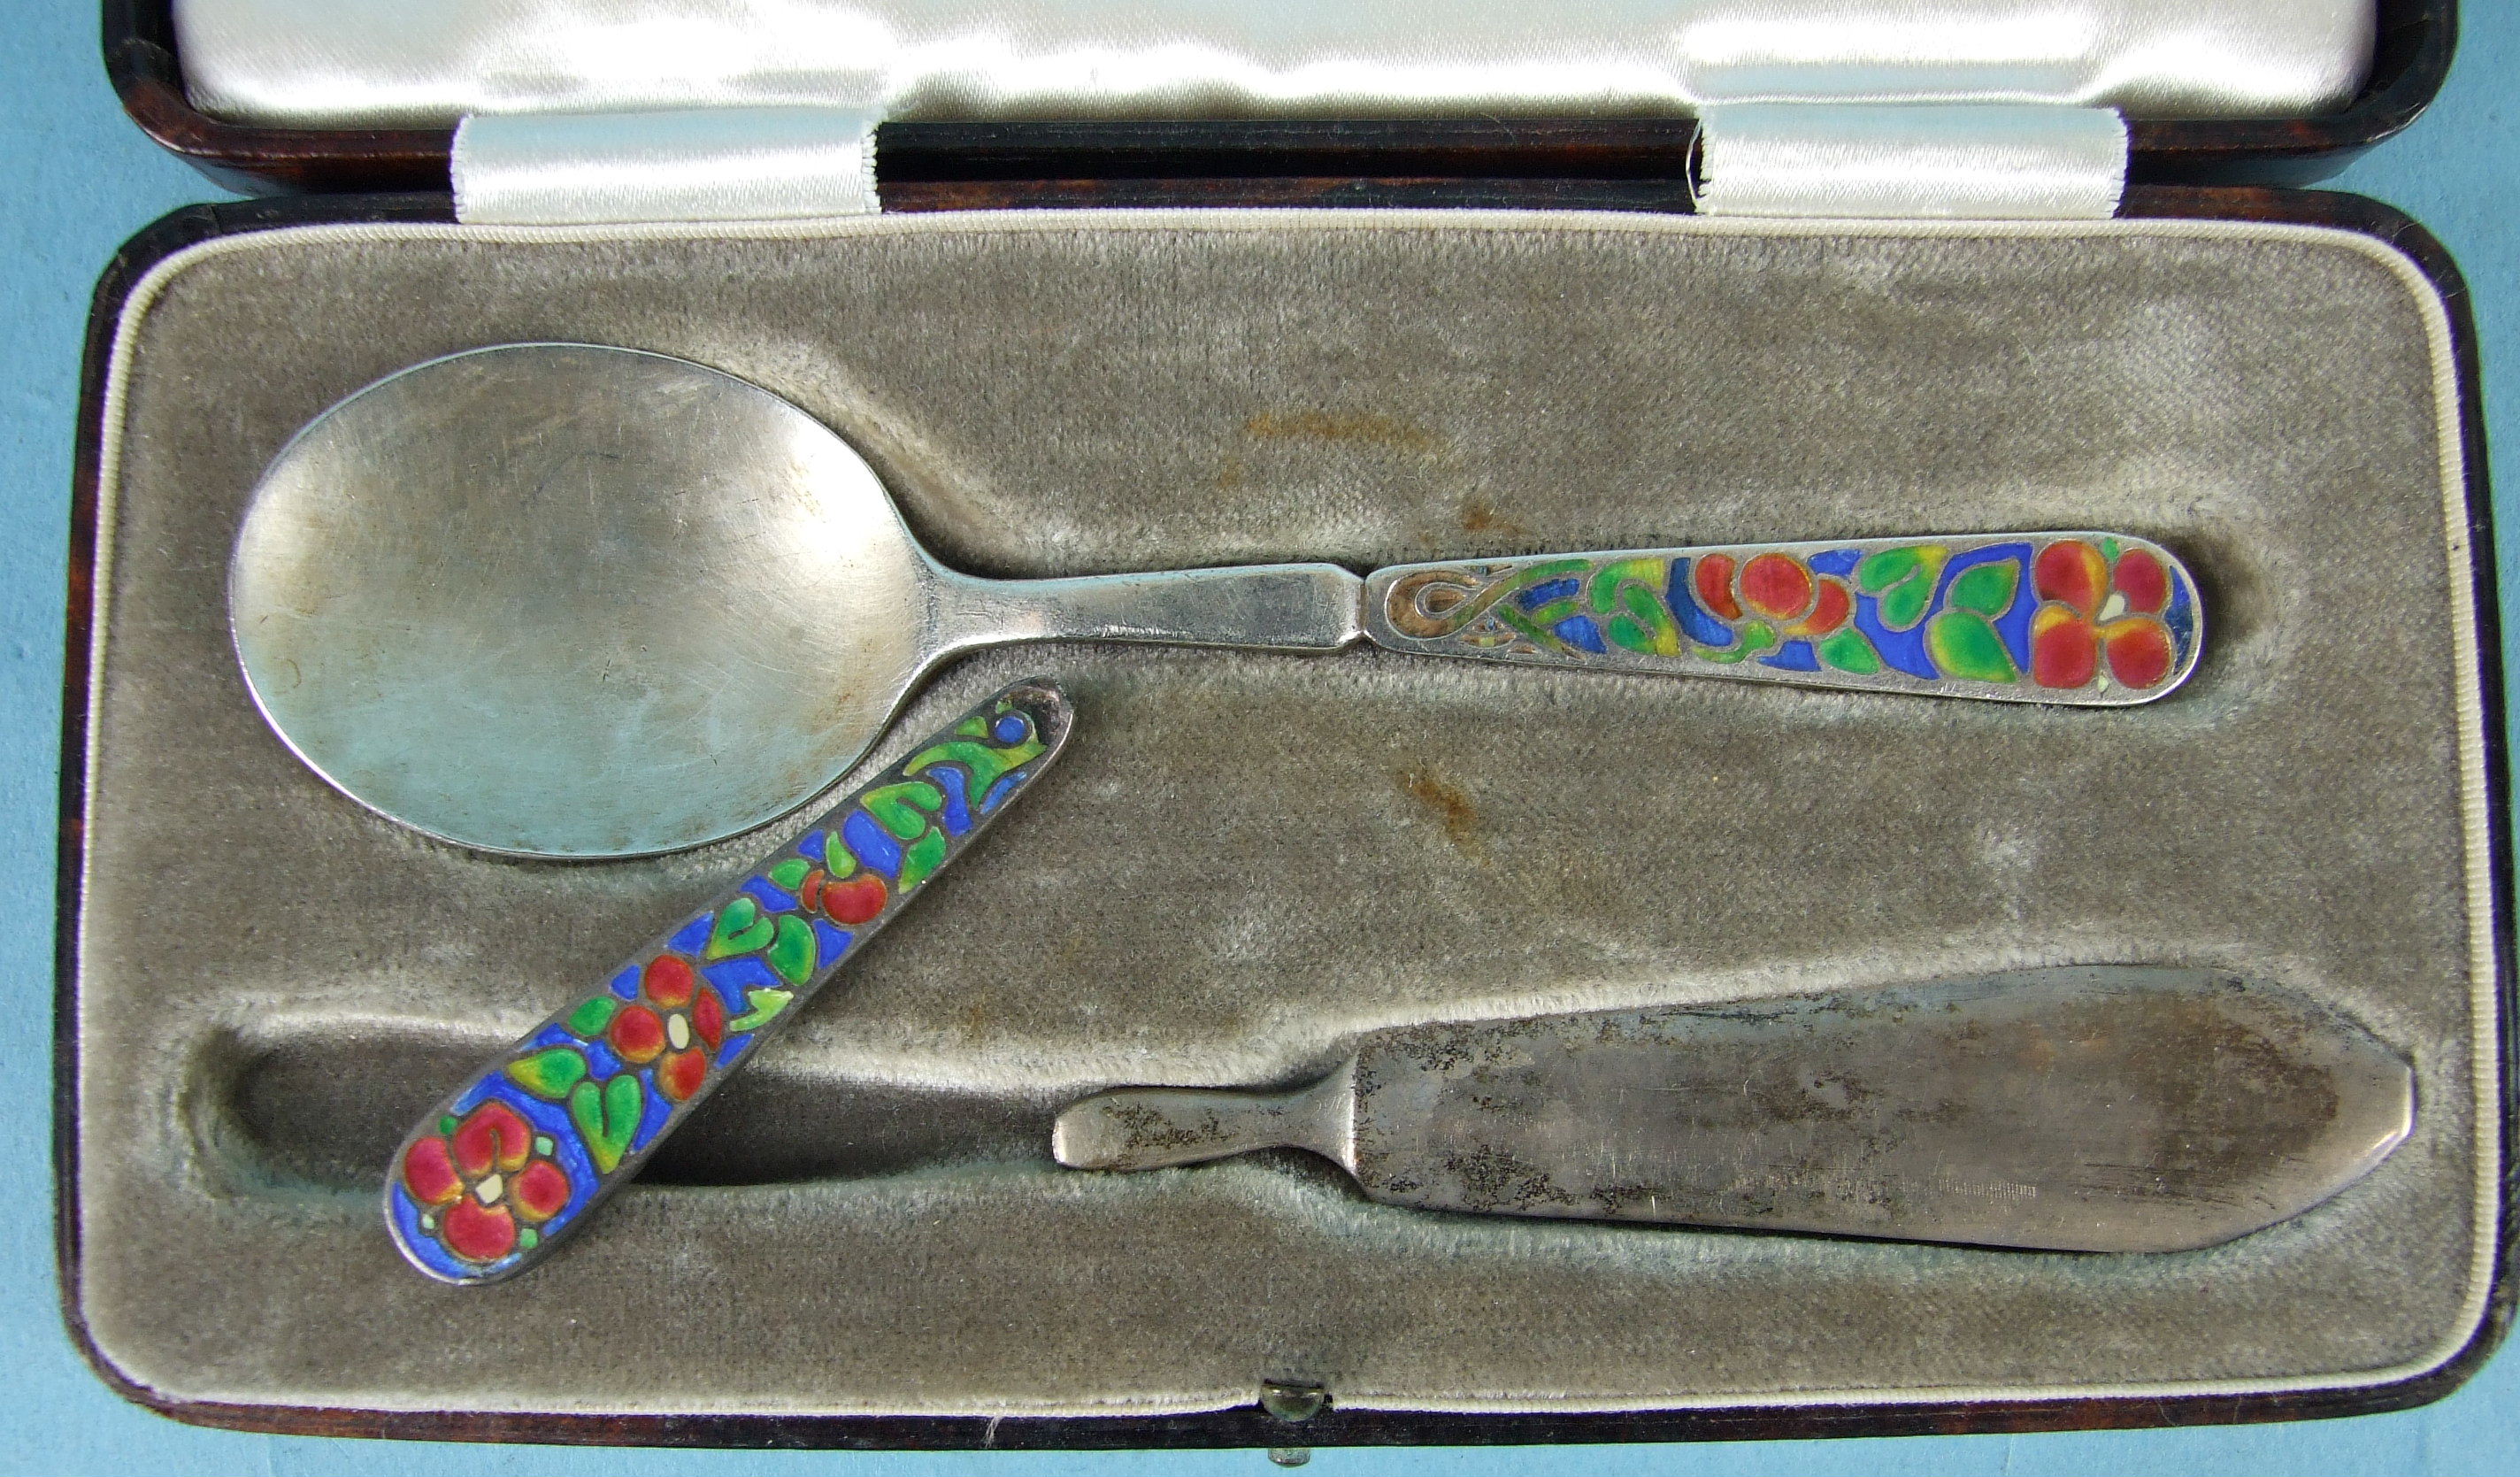 Bernard Instone, a cased Christening set consisting of a spoon and knife, the handles with red, - Image 2 of 3